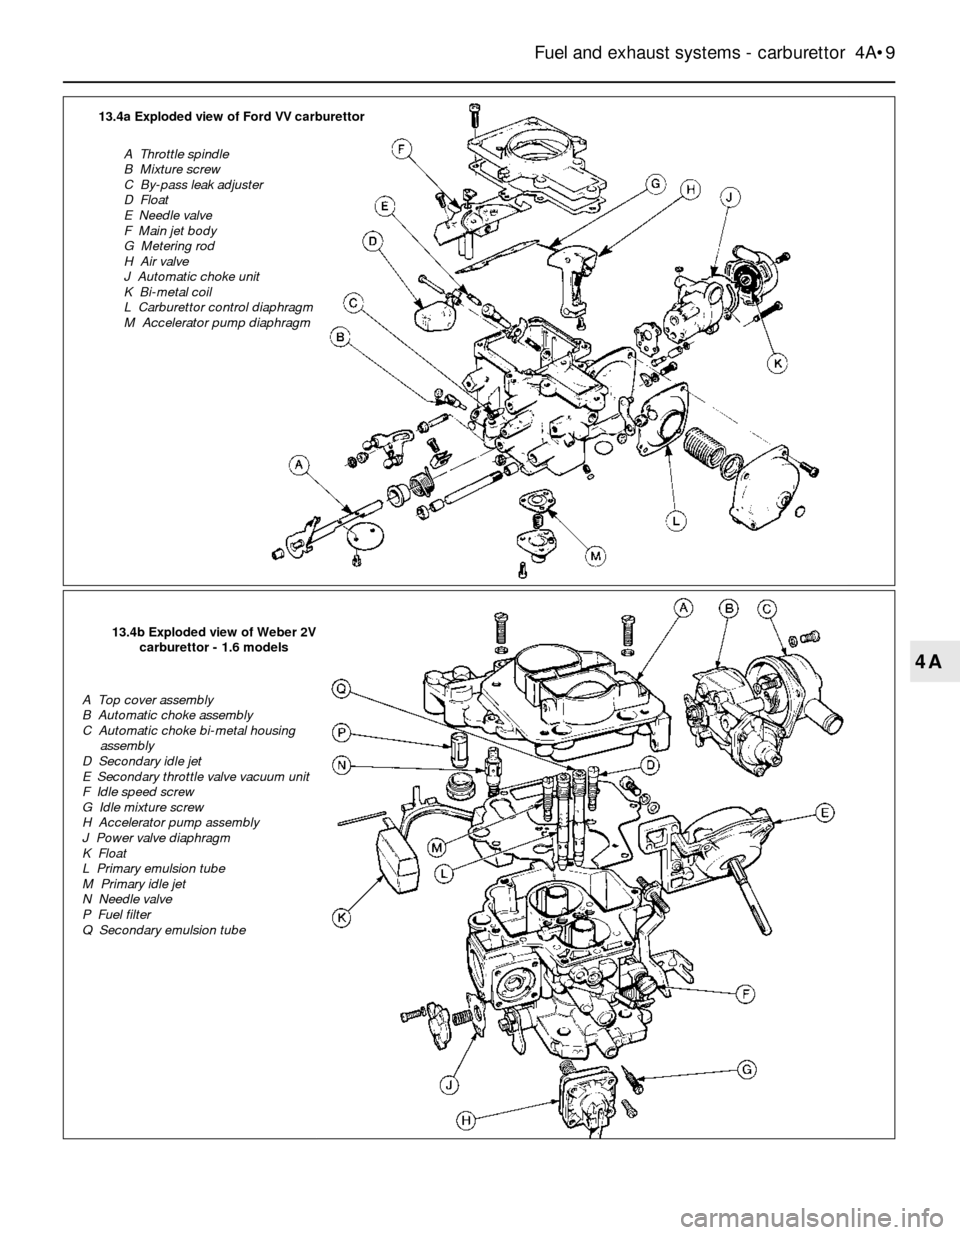 FORD SIERRA 1987 2.G Fuel And Exhaust Systems Carburettor Workshop Manual Fuel and exhaust systems - carburettor  4A•9
4A
13.4a Exploded view of Ford VV carburettor
A  Throttle spindle
B  Mixture screw
C  By-pass leak adjuster
D  Float
E  Needle valve
F  Main jet body
G  